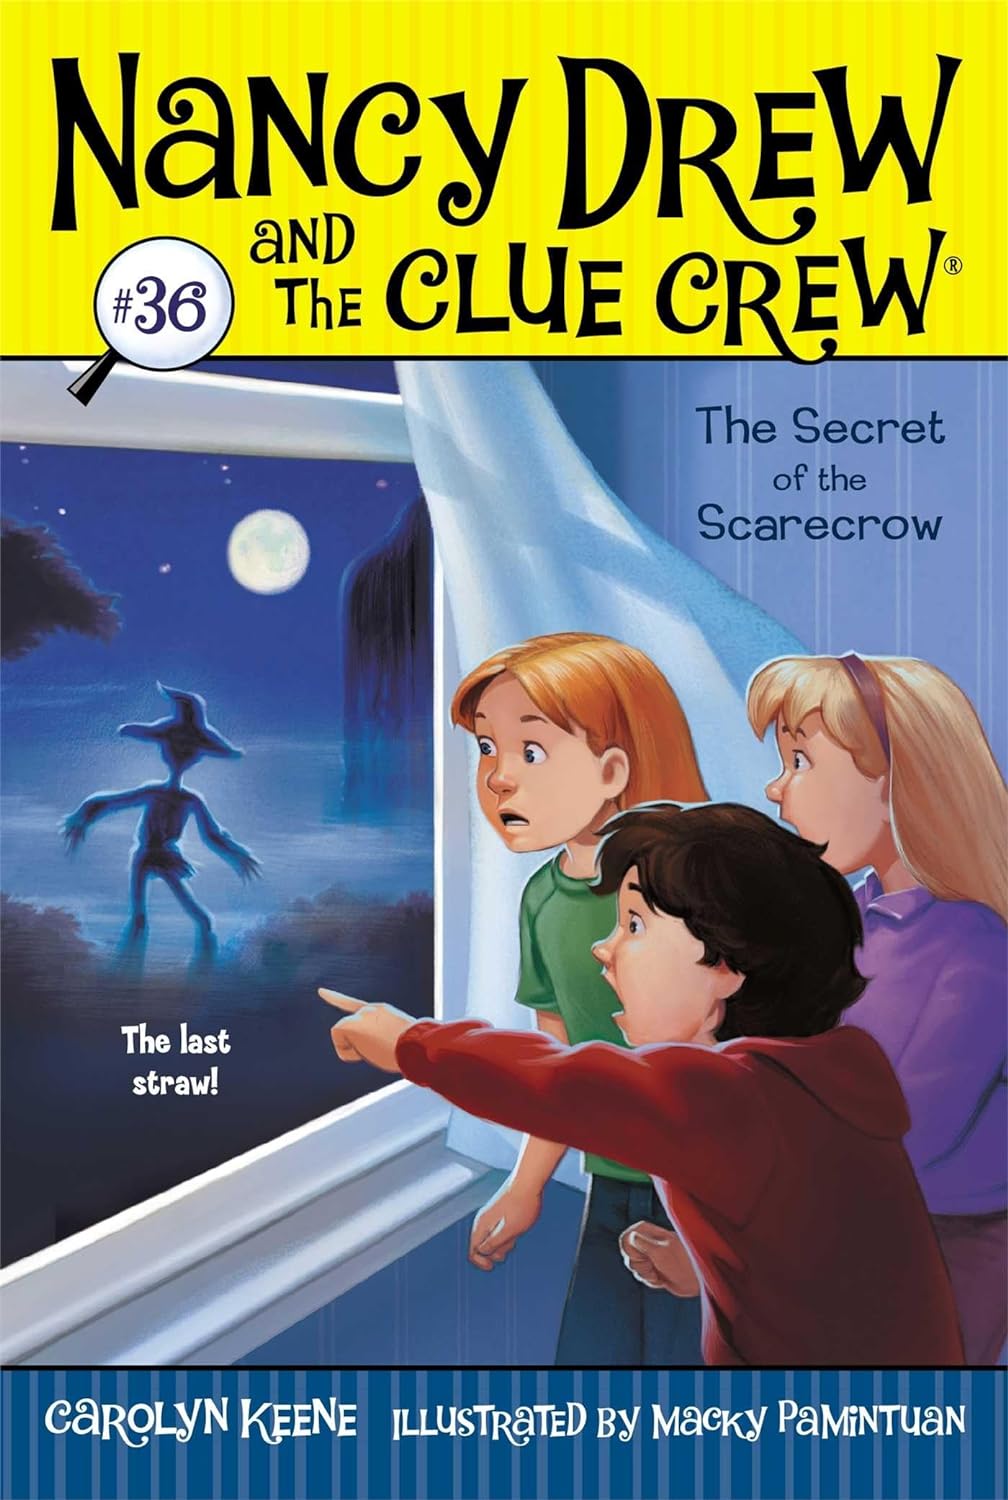 Nancy Drew and the Clue Crew # 36 : The secret of the scarecrow - Carolyn Keene